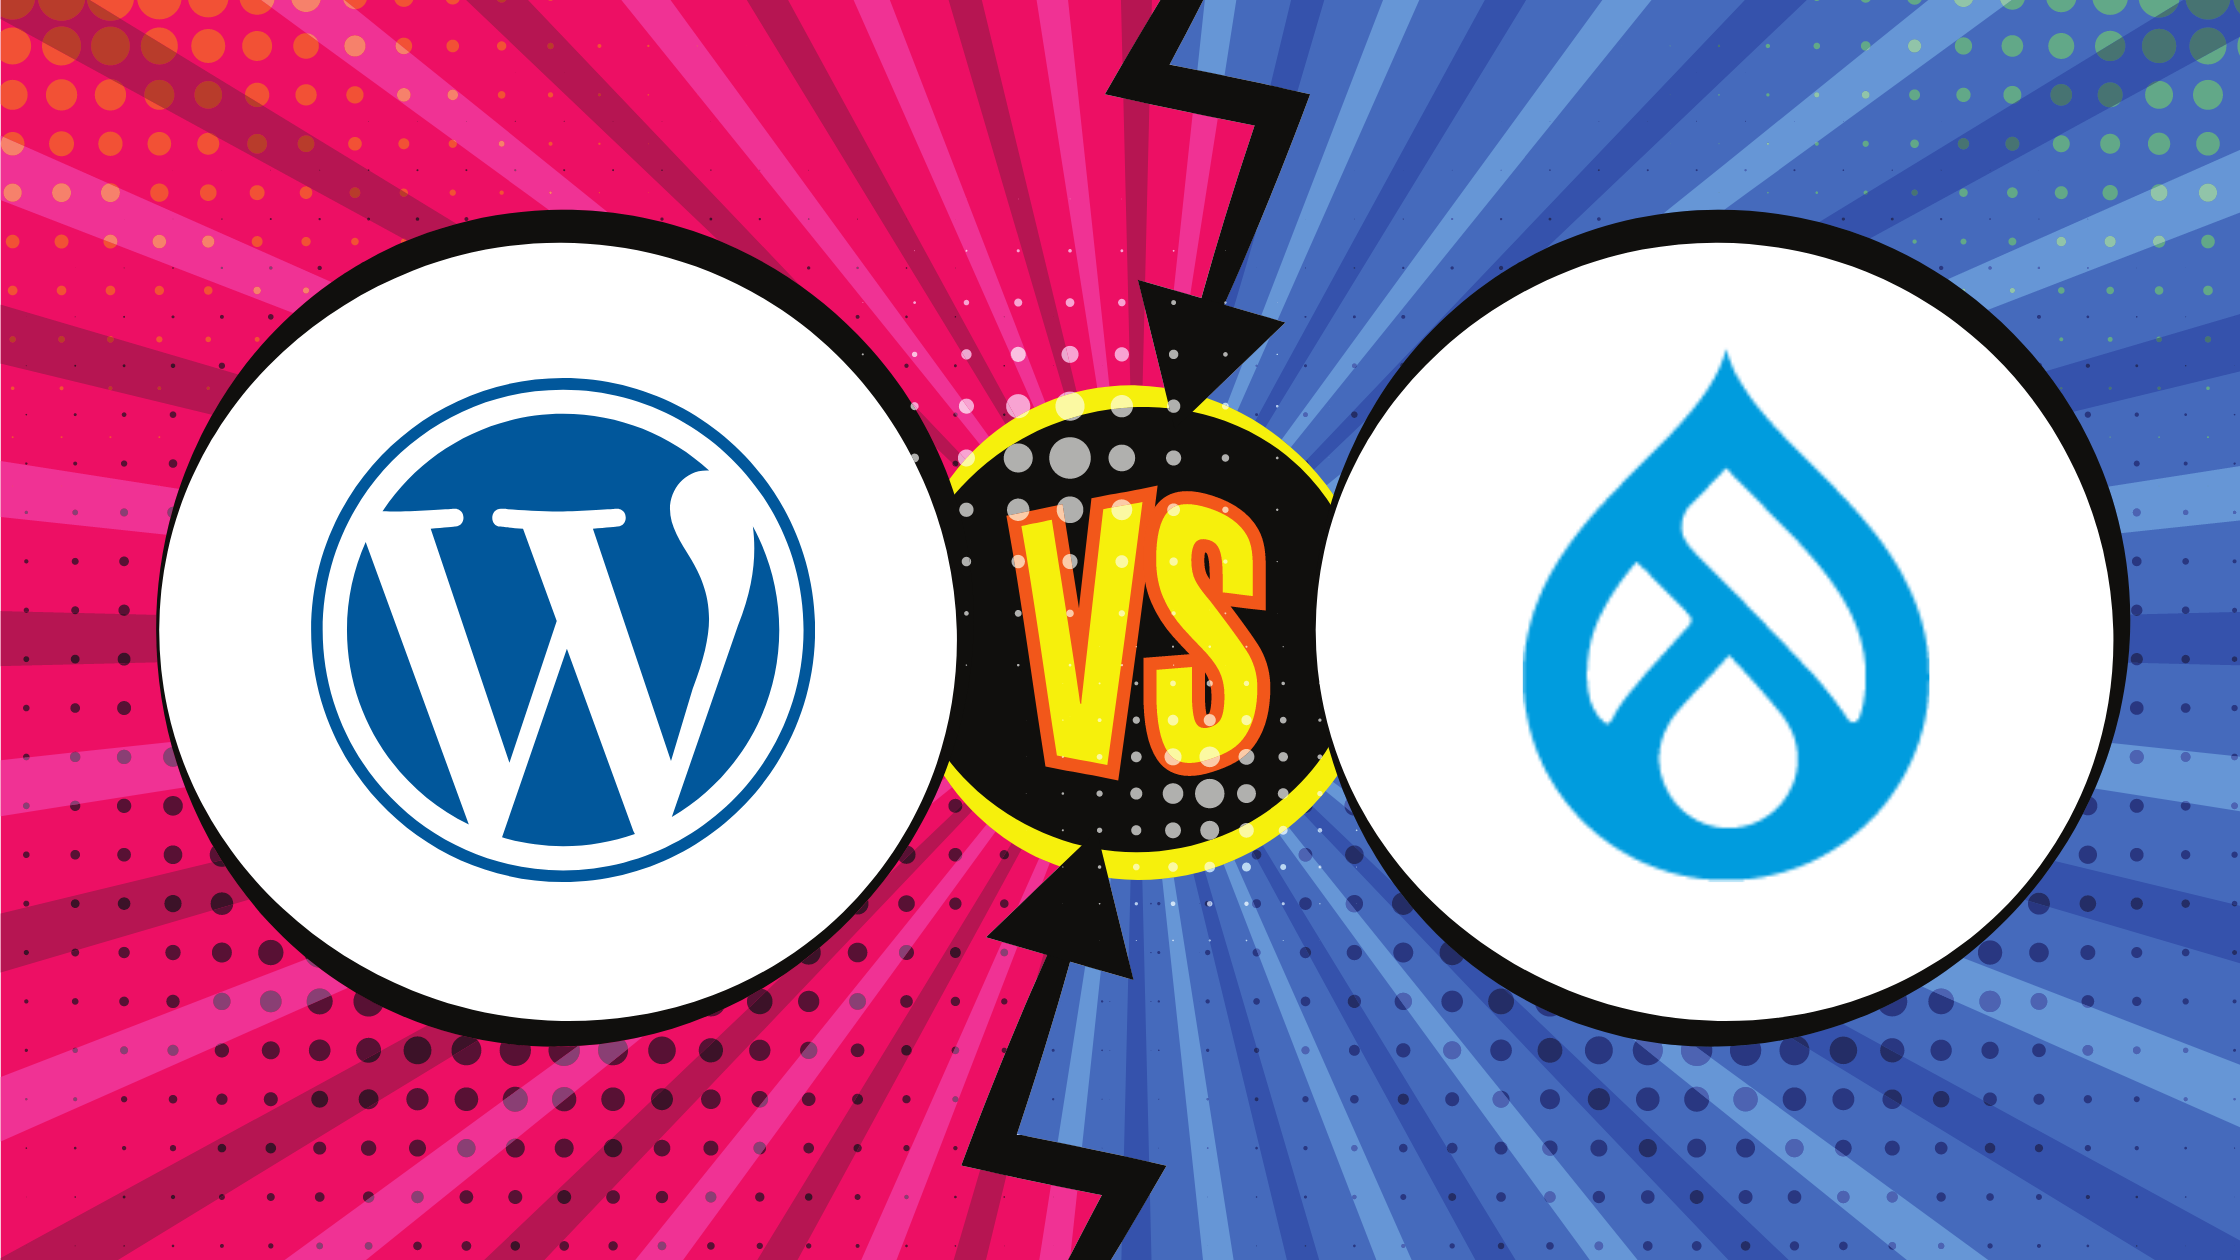 Which CMS is better? WORDPRESS or DRUPAL : Let’s find out! 